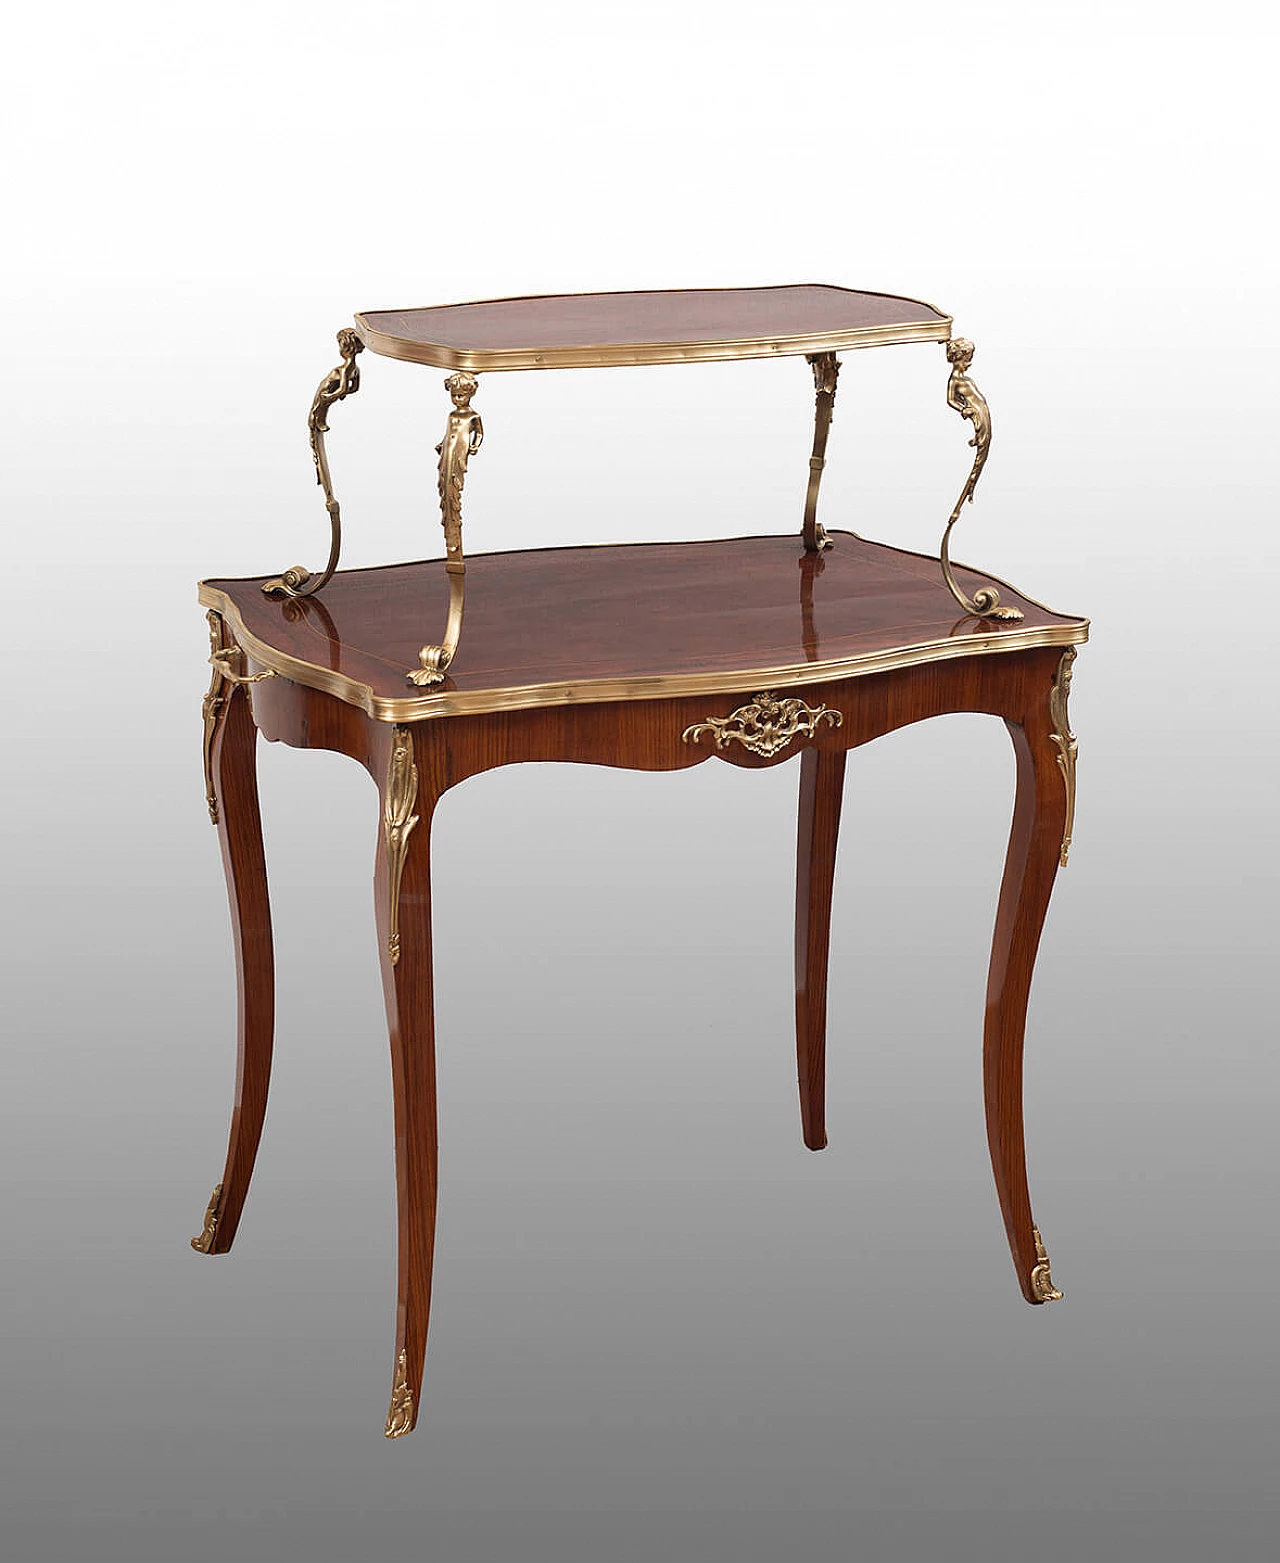 French Napoleon III coffee table in polychrome wood with gilded bronze applications, 19th century 1395512